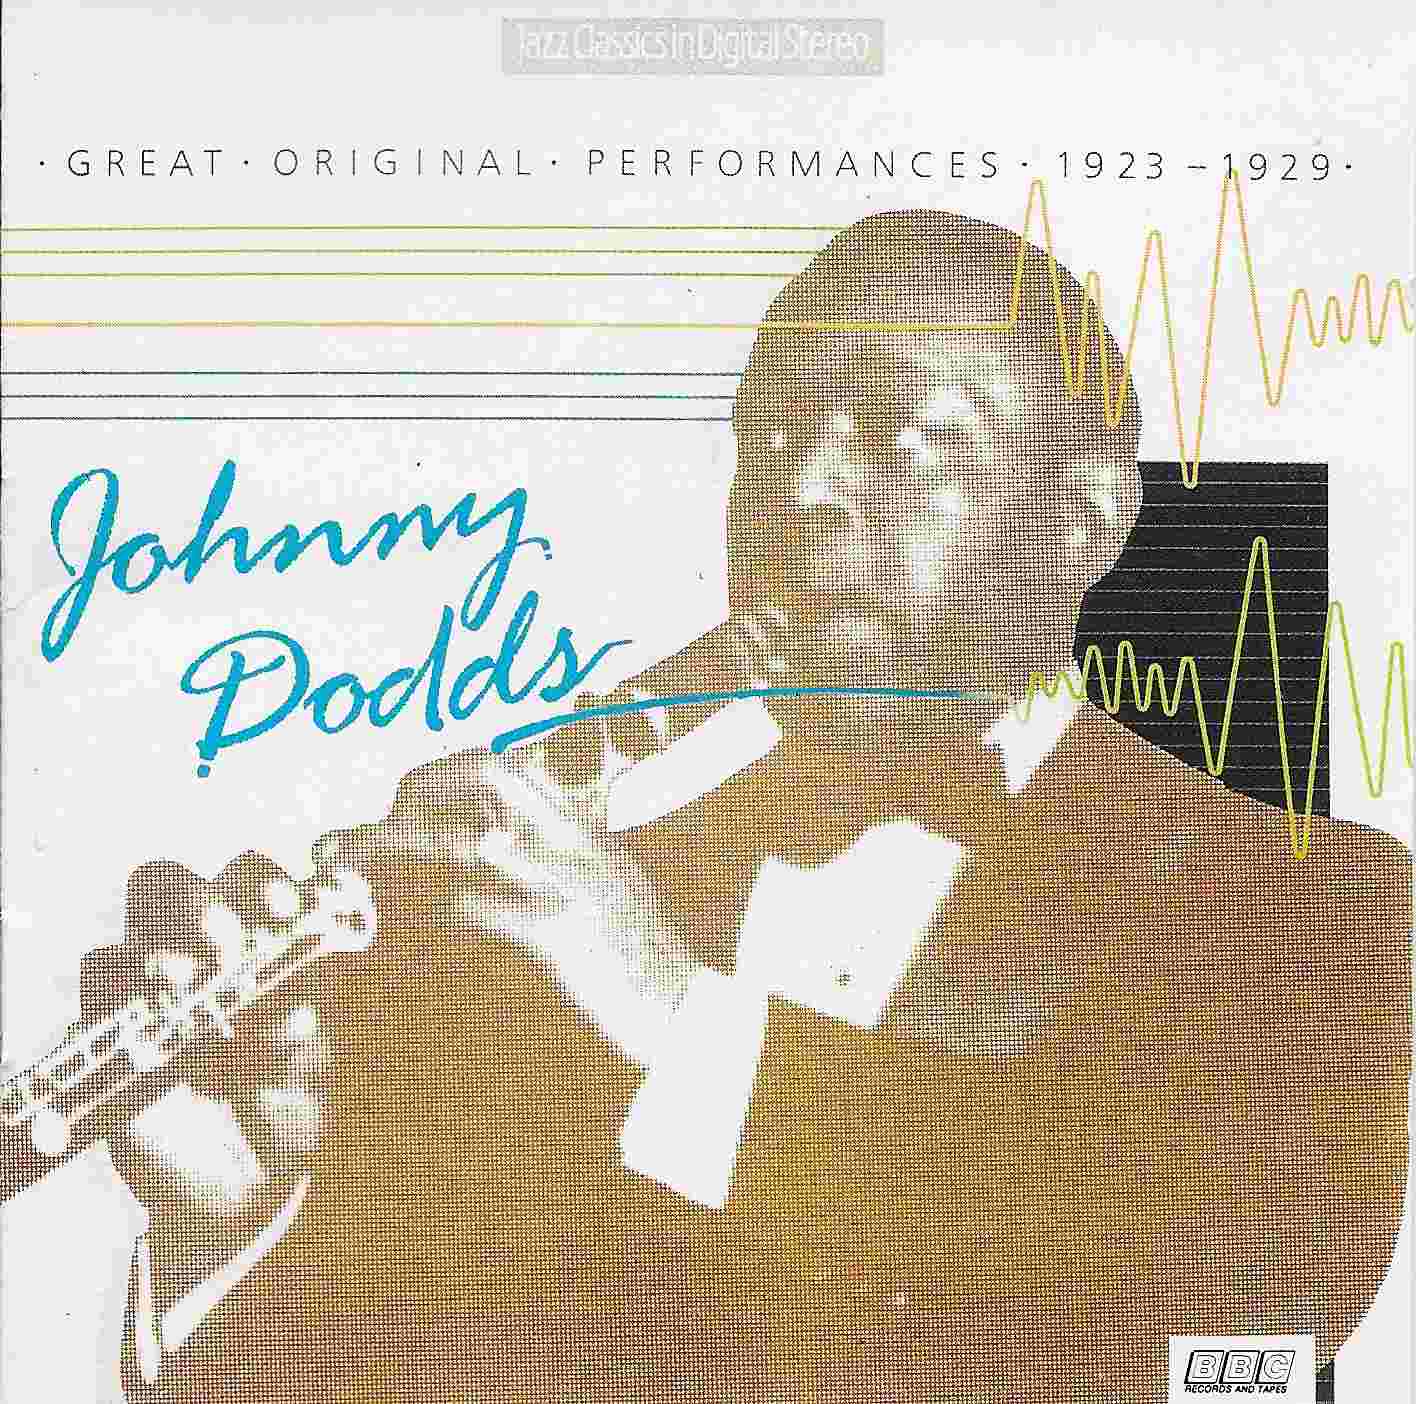 Picture of Jazz Classics - Johnny Dodds by artist Johnny Dodds from the BBC cds - Records and Tapes library